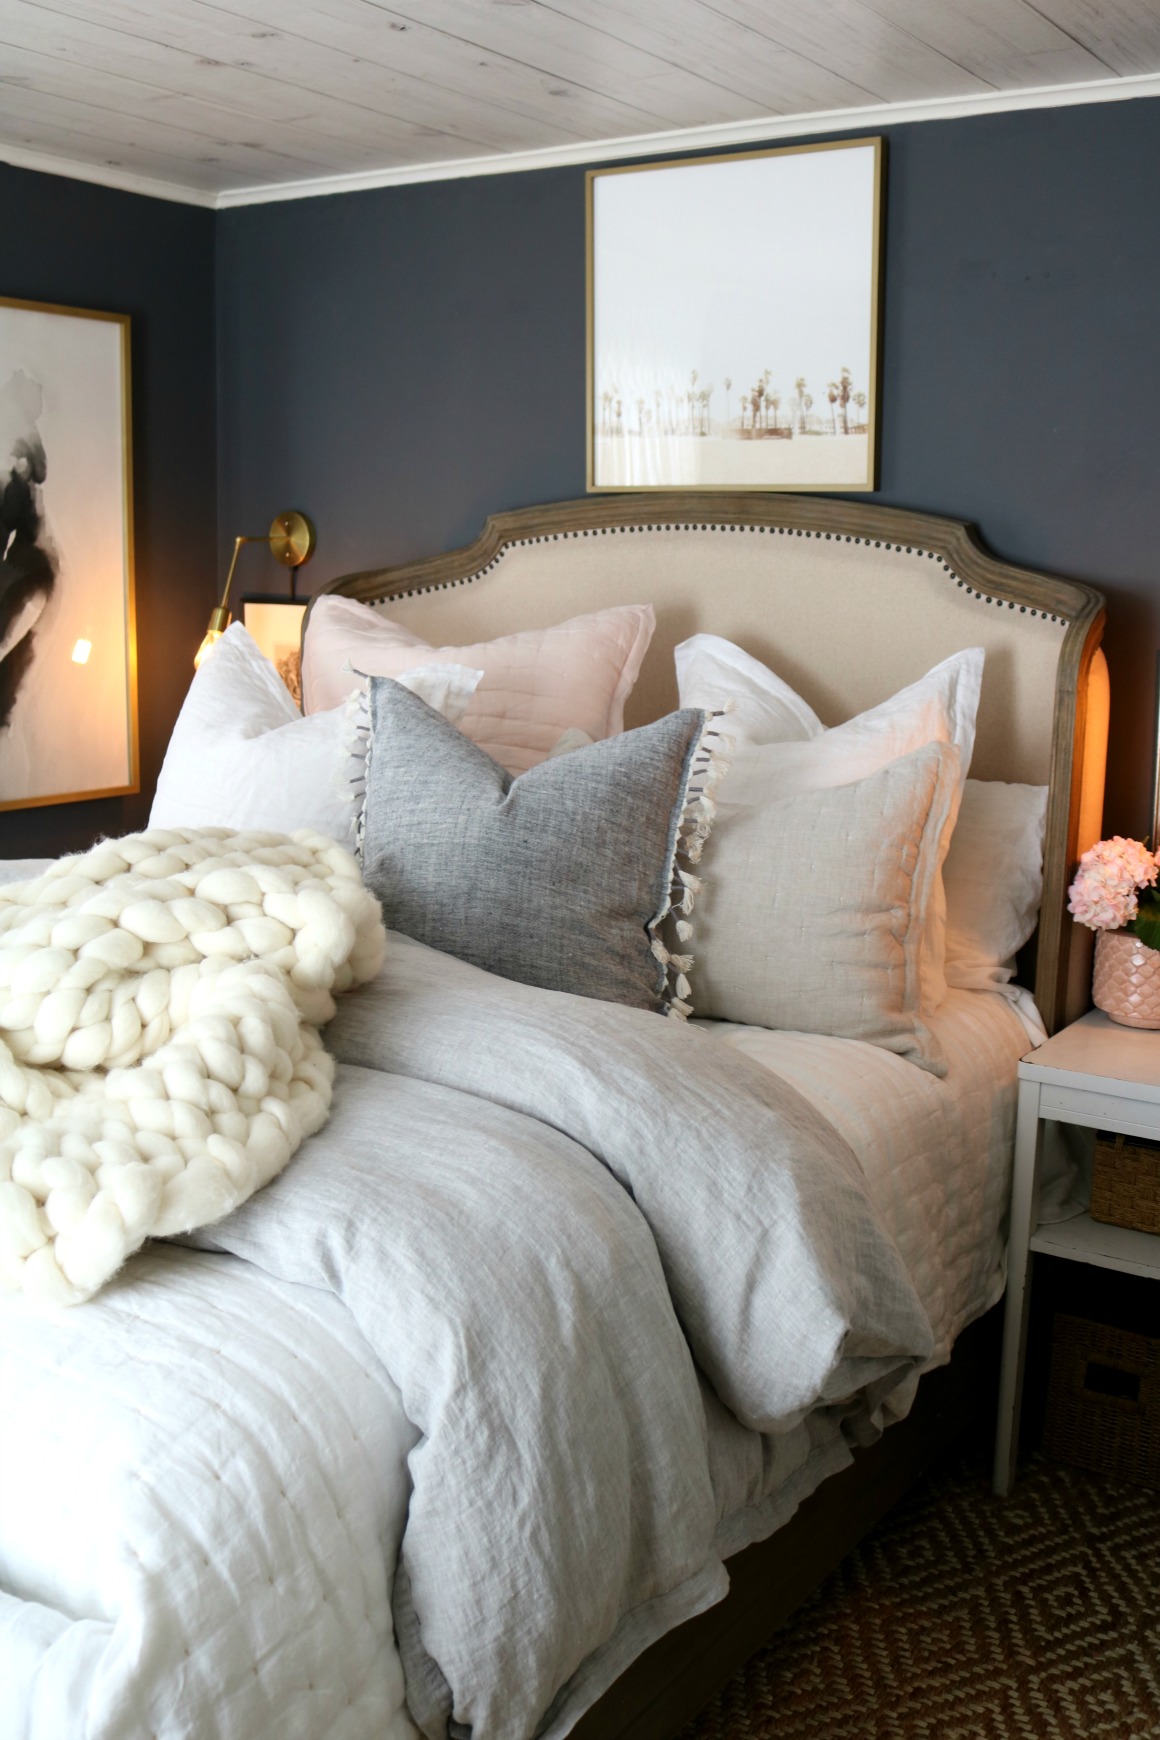 How To Make Your Bedding Fluffy And Our, King Size Insert For Queen Duvet